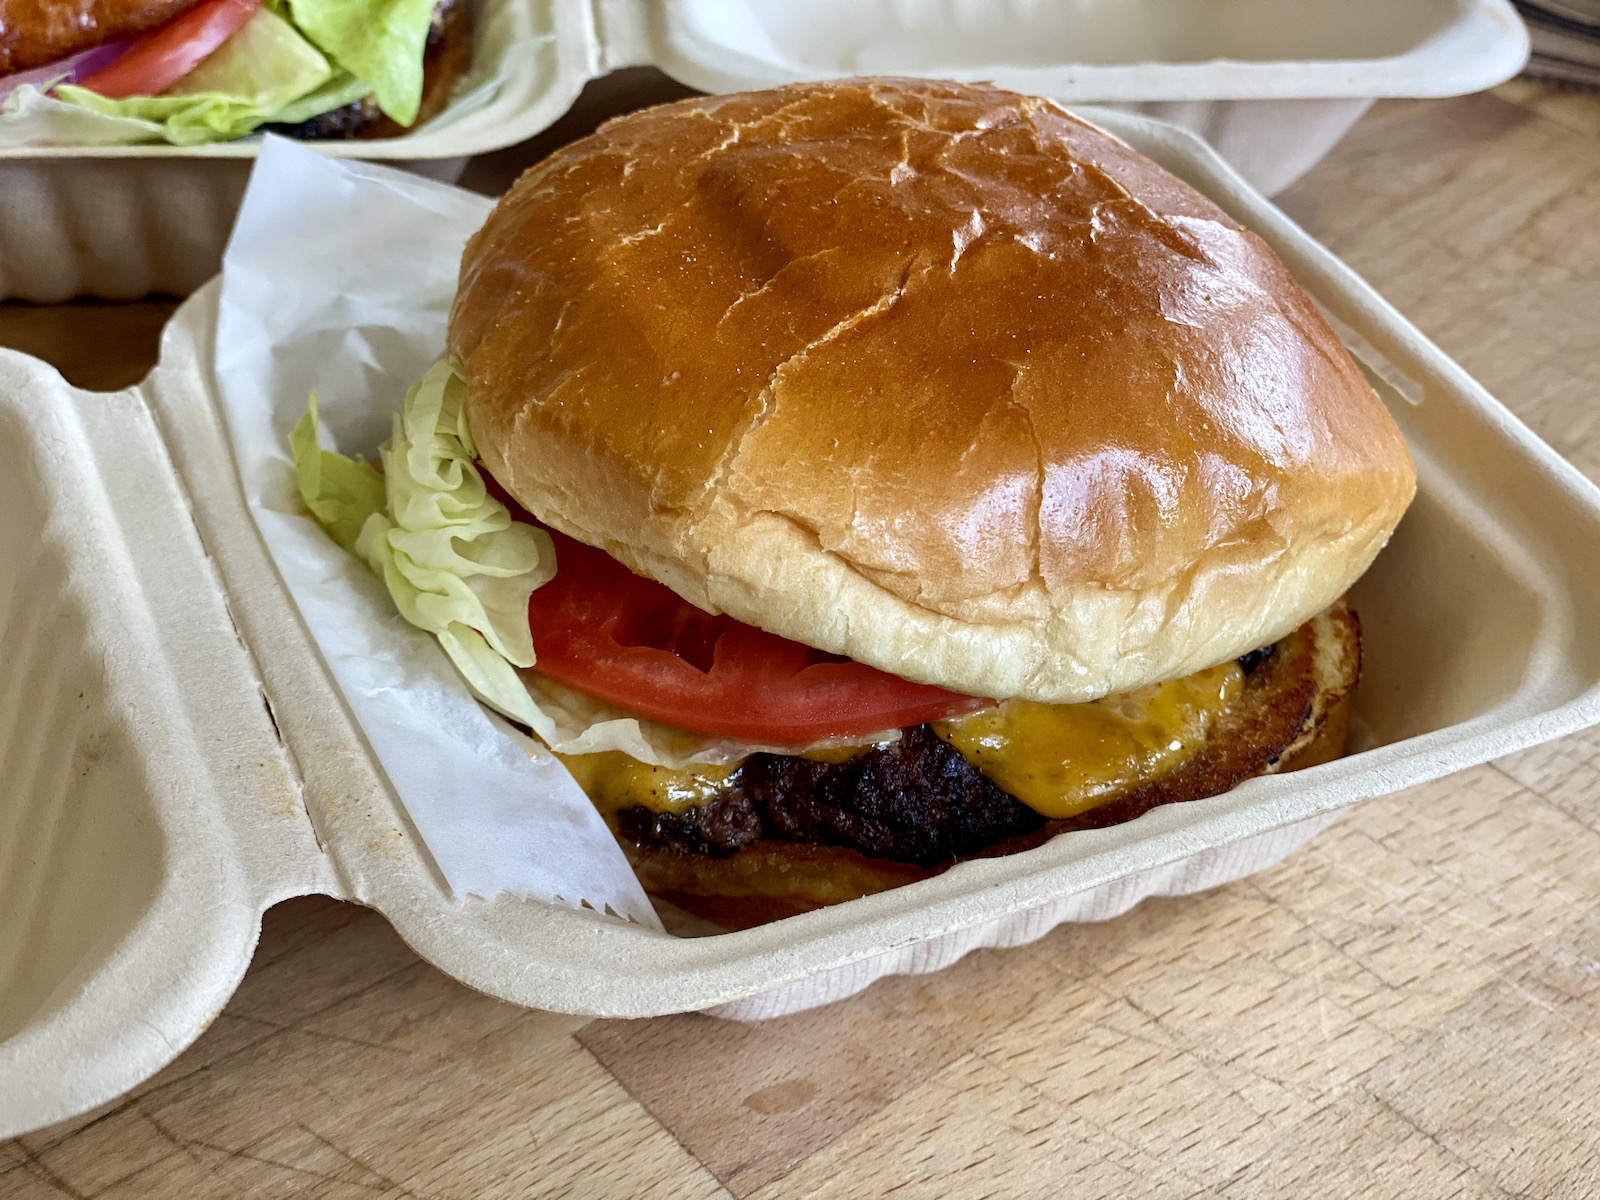 The Heirloom Burger in its package